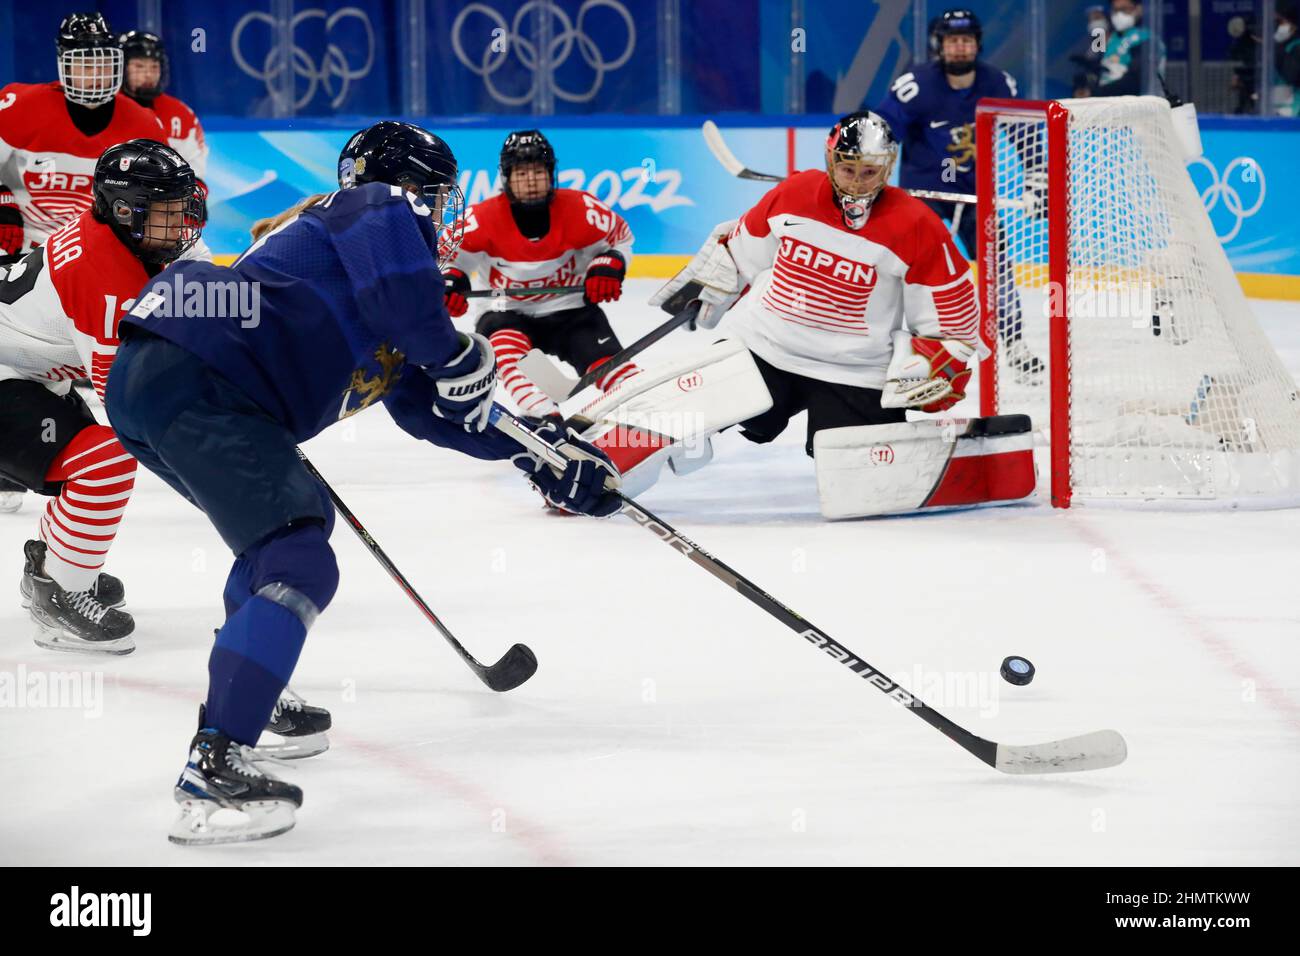 Beijing, Hebei, China. 12th Feb, 2022. Team Finland forward Elisa Holopainen (10) shoots and has her shot blocked by Team Japan goalkeeper Nana Fujimoto (1) during the women's ice hockey quarterfinal during the Beijing 2022 Olympic Winter Games at Wukesong Sports Centre. (Credit Image: © David G. McIntyre/ZUMA Press Wire) Credit: ZUMA Press, Inc./Alamy Live News Stock Photo